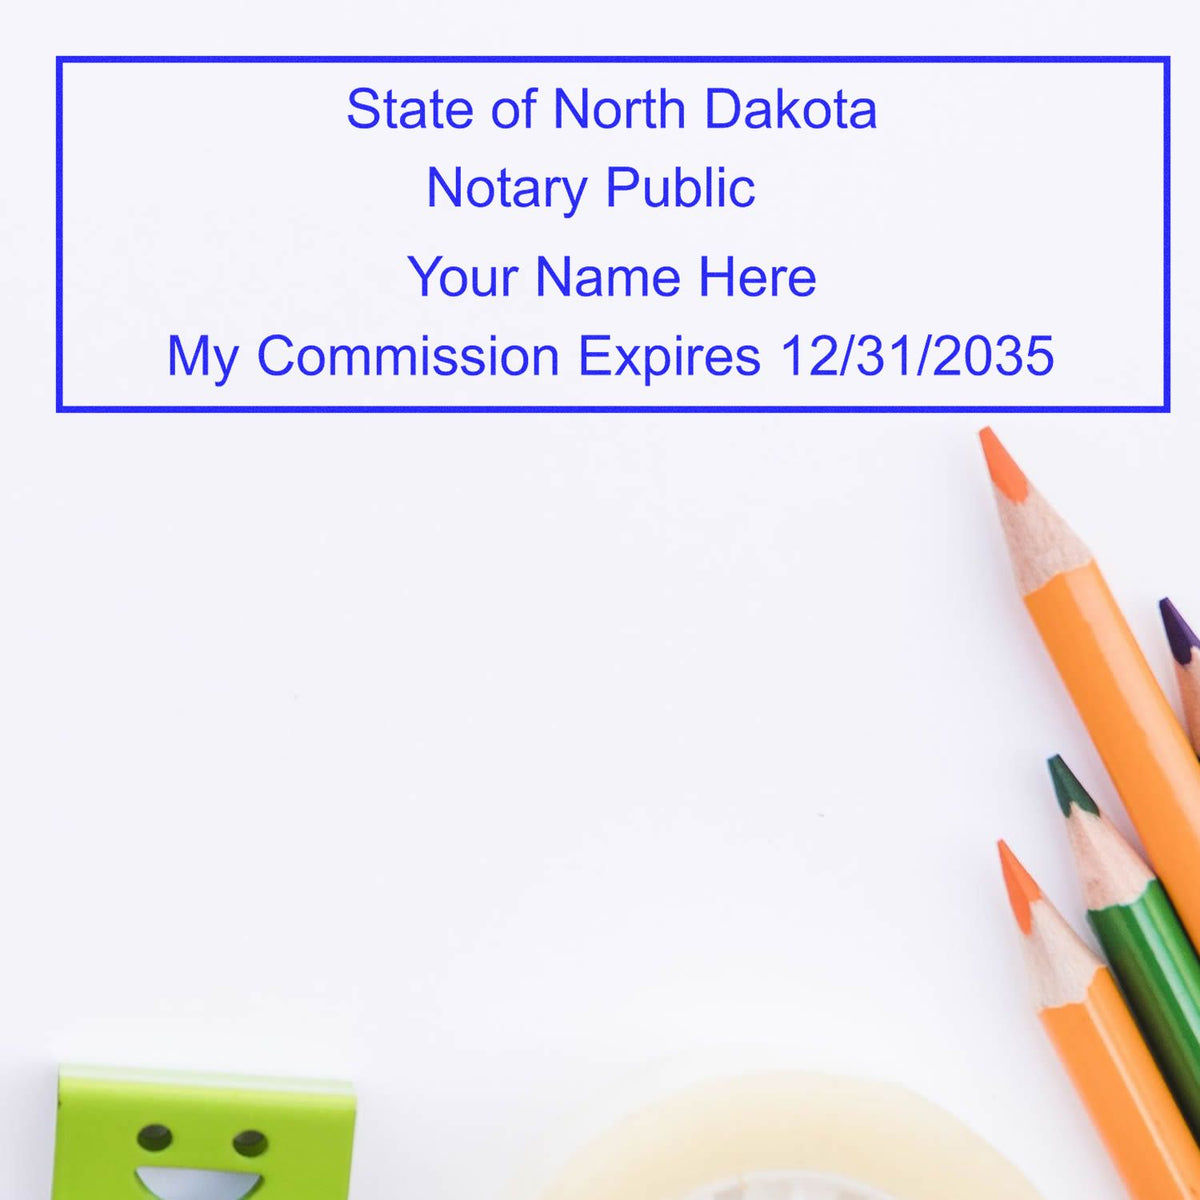 An alternative view of the Super Slim North Dakota Notary Public Stamp stamped on a sheet of paper showing the image in use